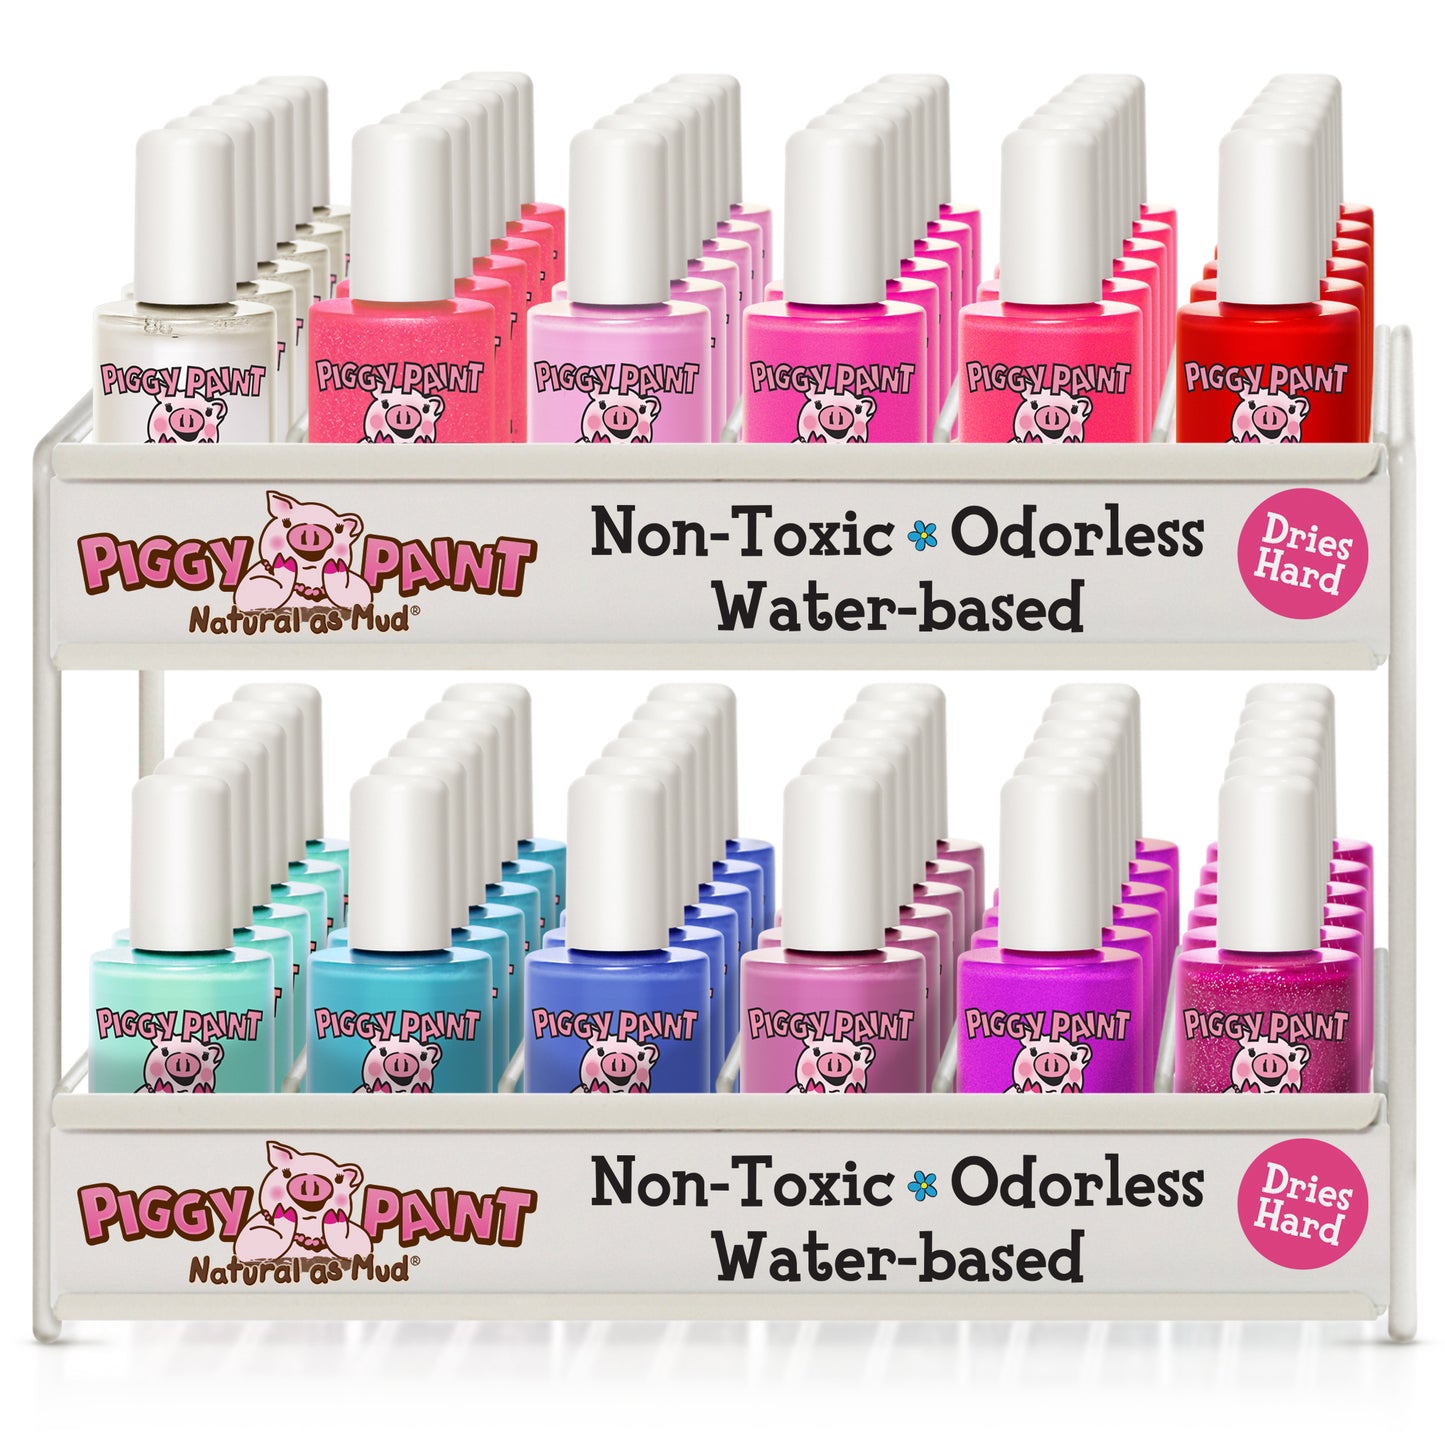 2 Tier Display – 72 Polishes - Wholesale